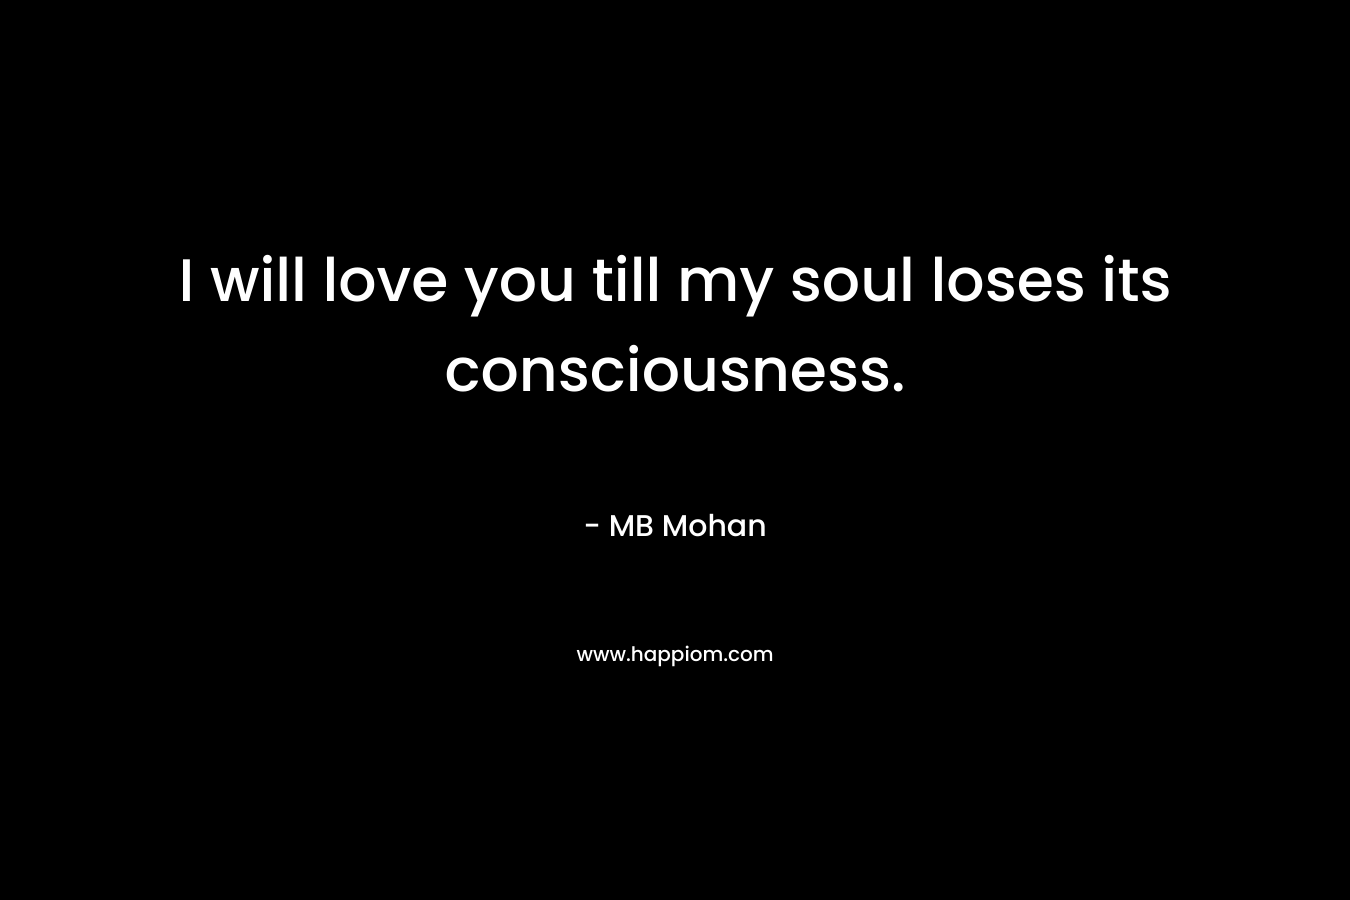 I will love you till my soul loses its consciousness.